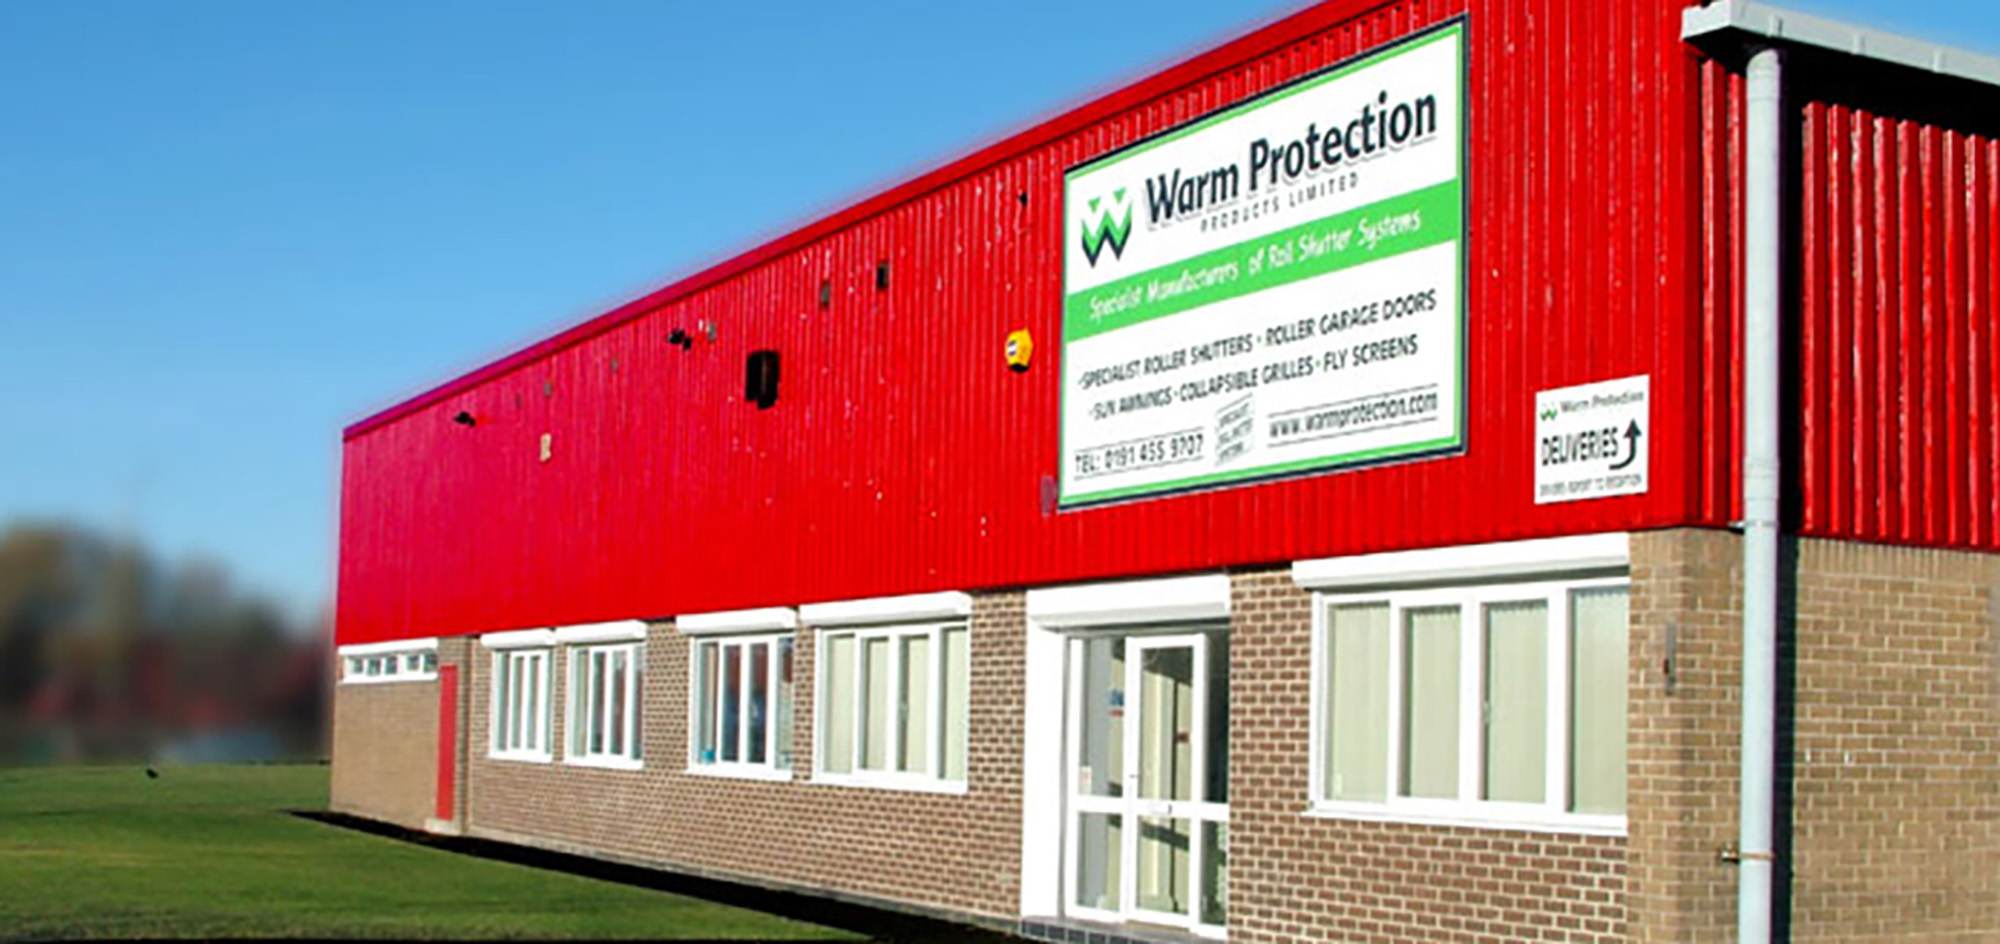 Warm Protection Products Ltd. Head office